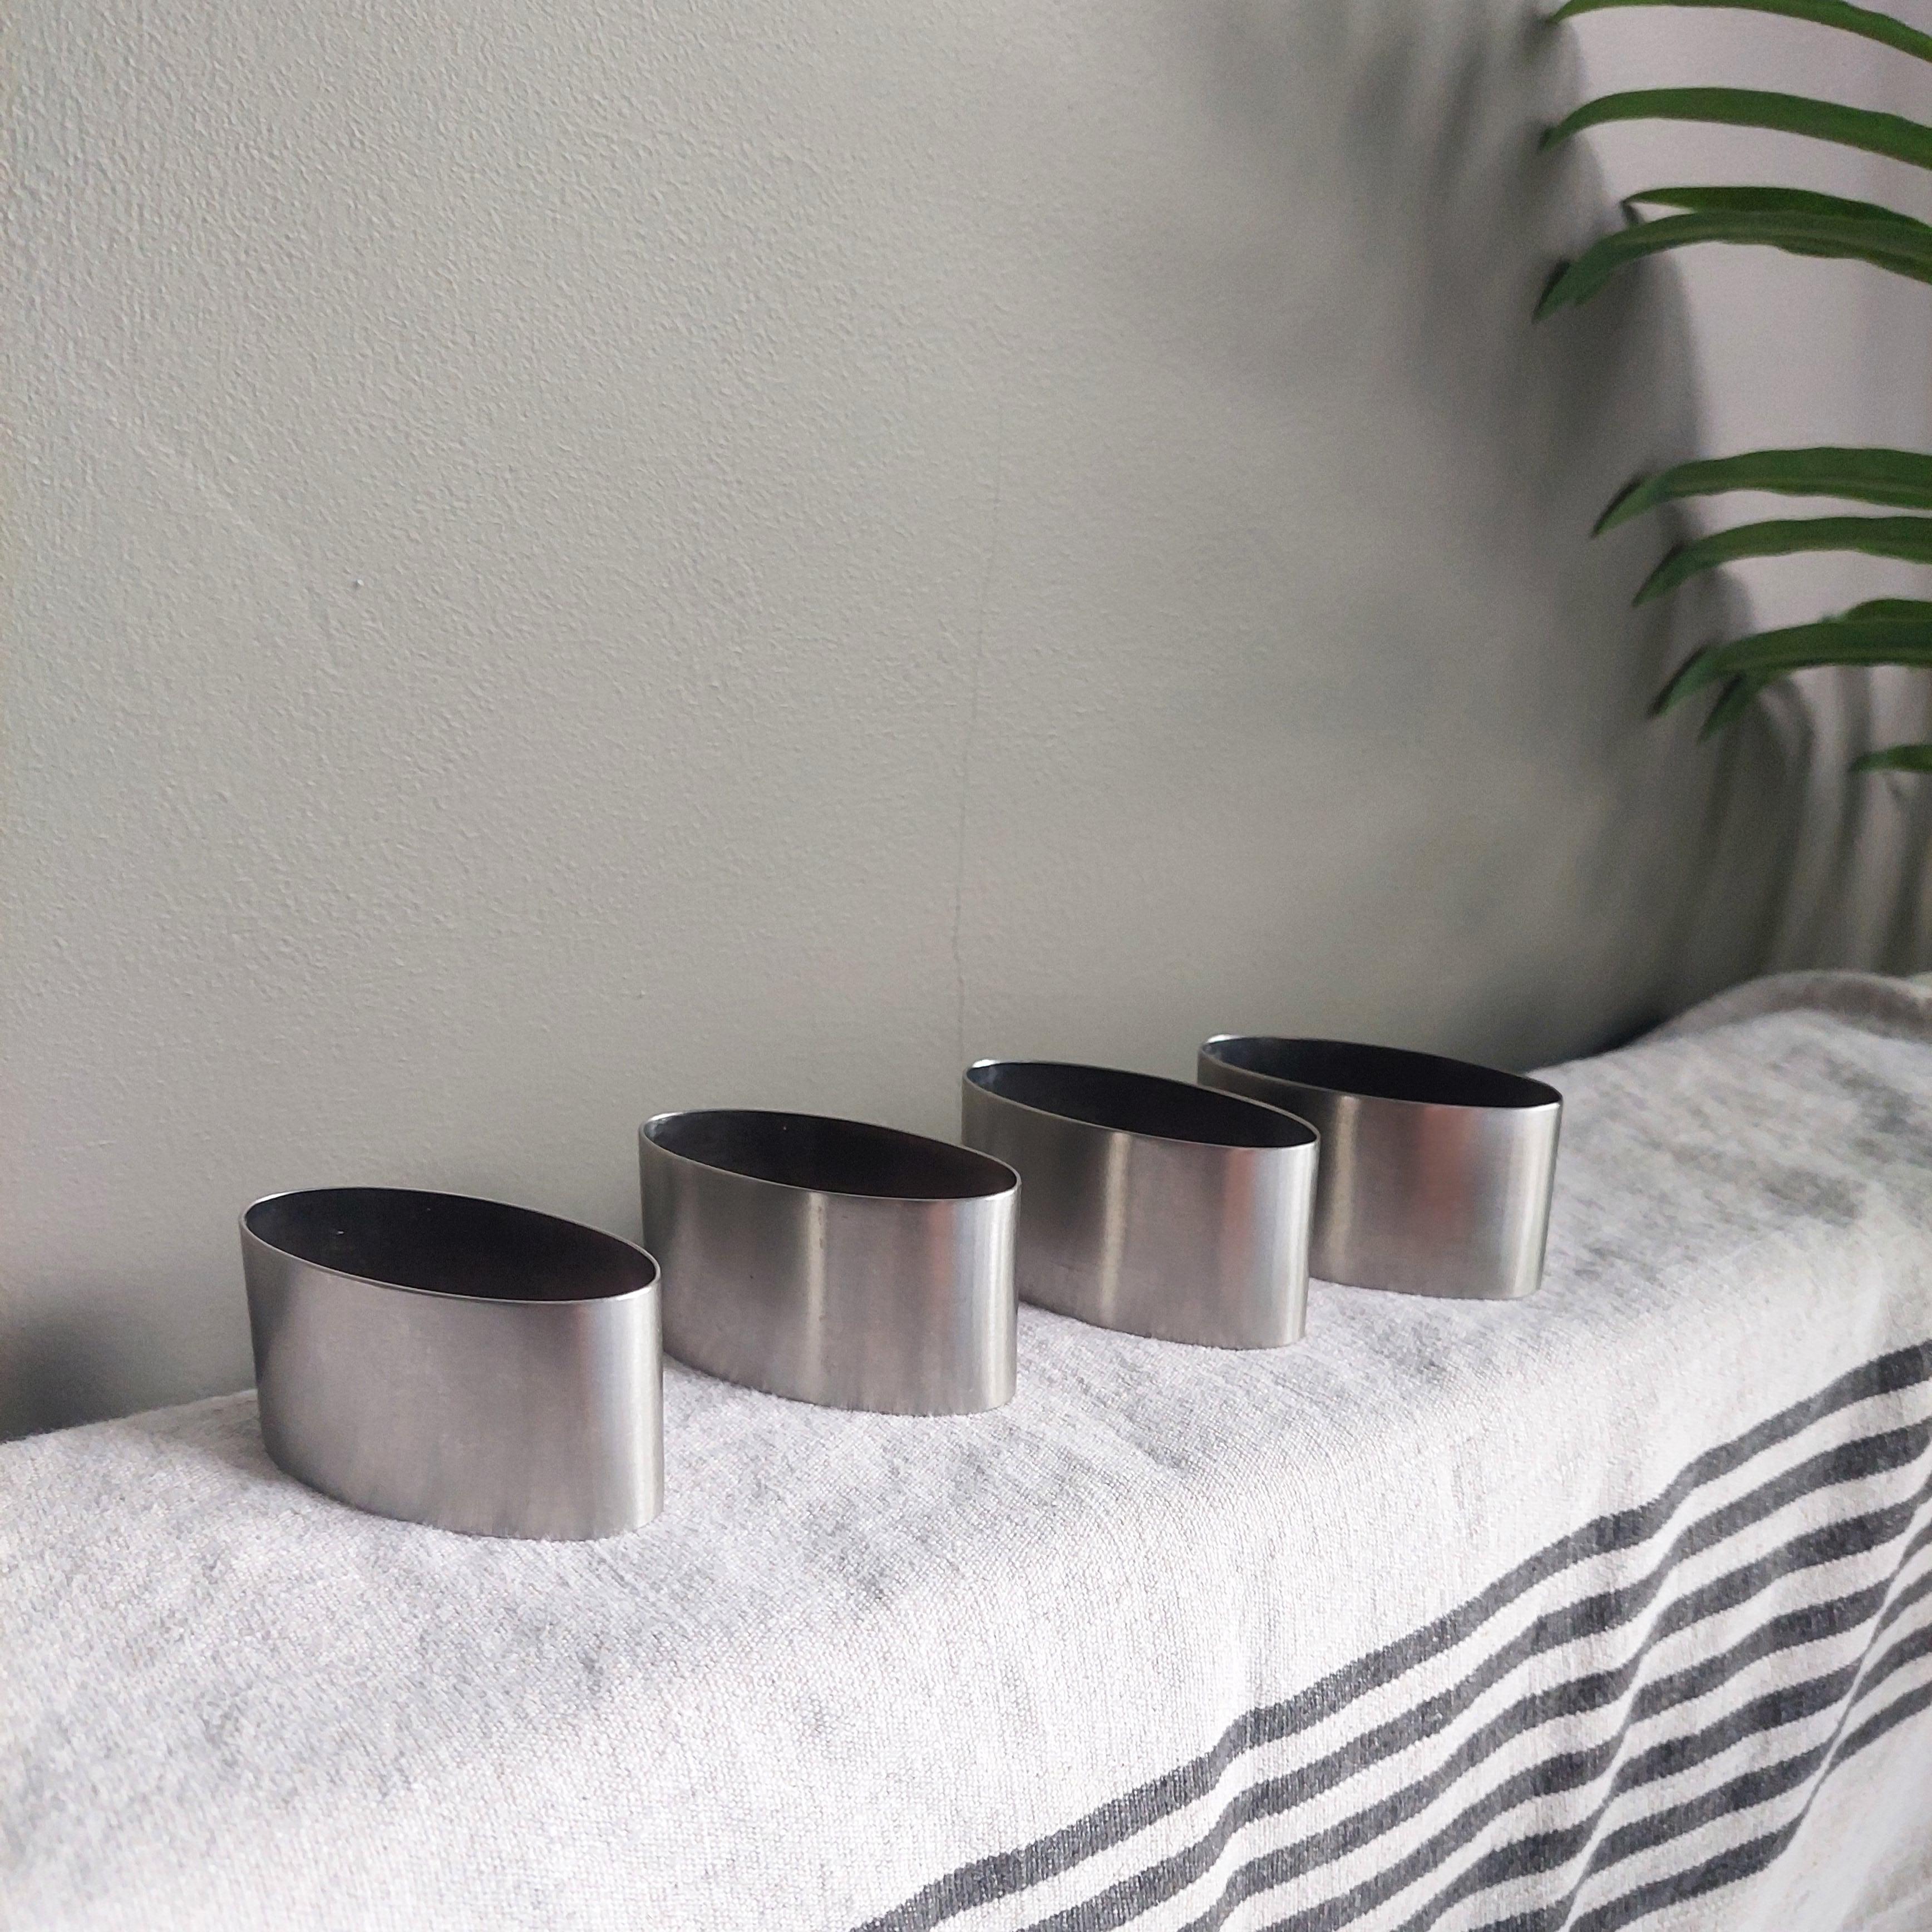 Stainless Steel Mid Century Robert Welch Old Hall stainless steel napkin rings, set of 4, 60s